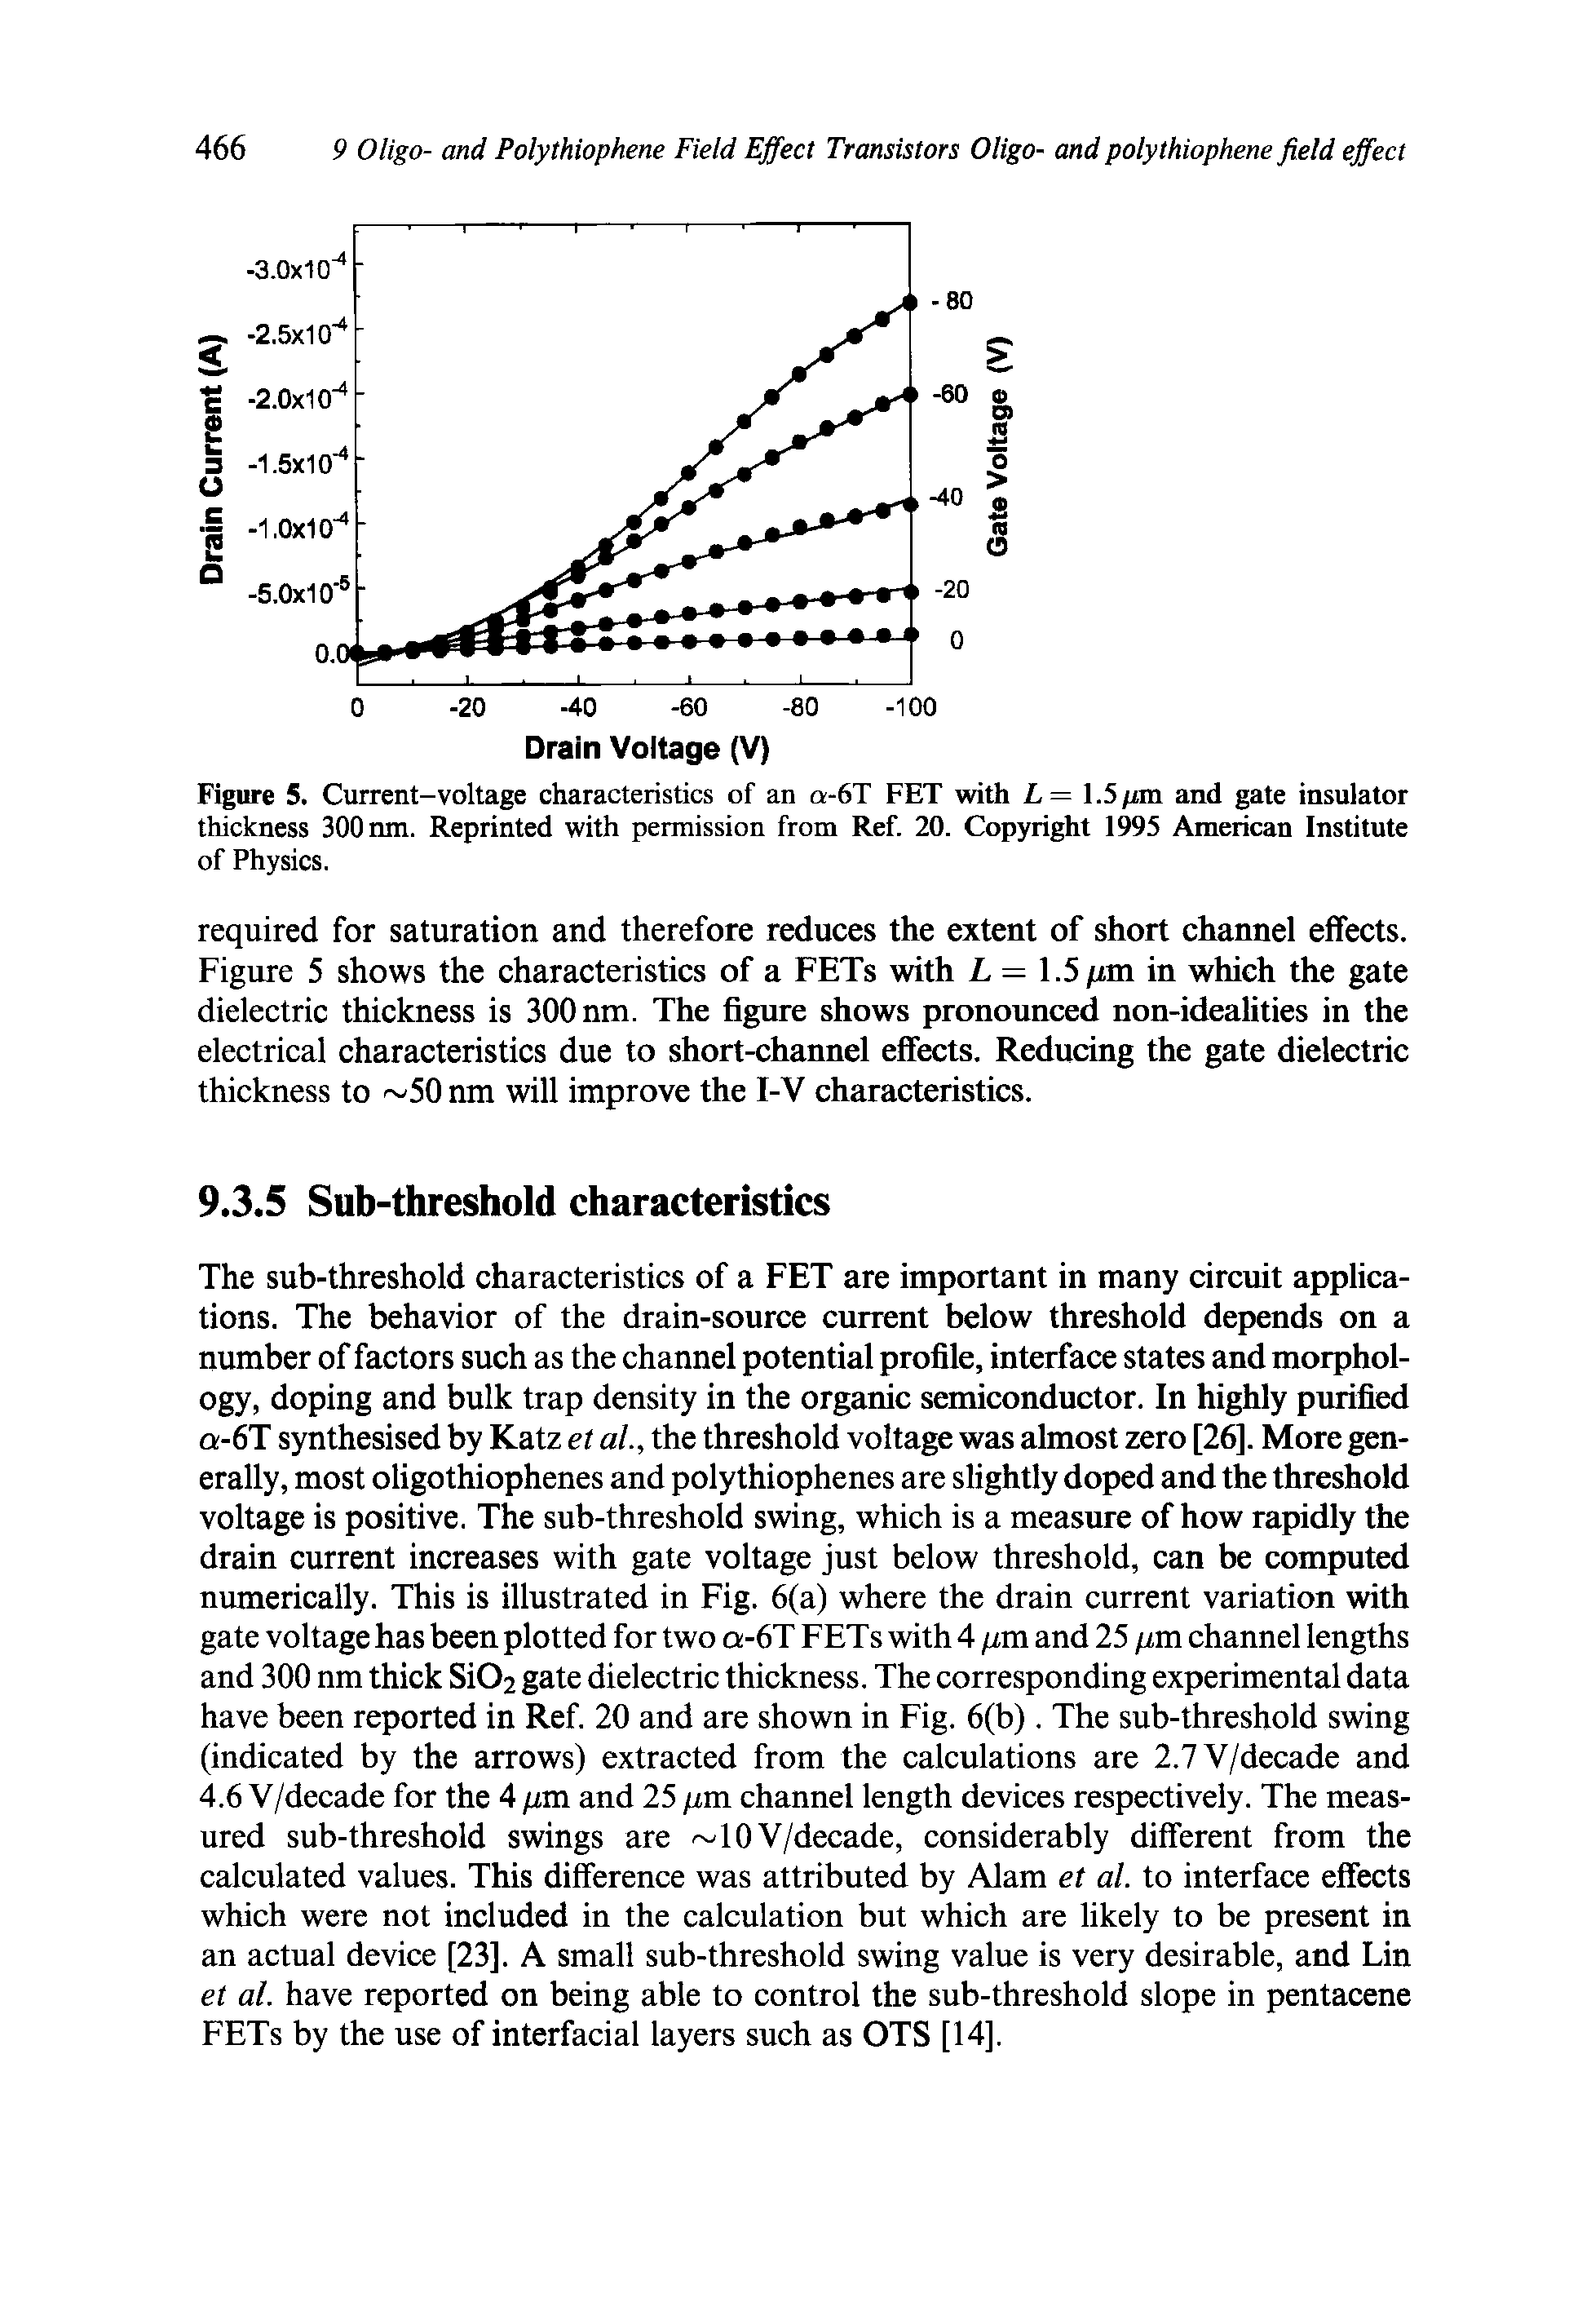 Figure 5. Current-voltage characteristics of an o -6T FET with L= 1.5 pm and gate insulator thickness 300 nm. Reprinted with permission from Ref. 20. Copyright 1995 American Institute of Physics.